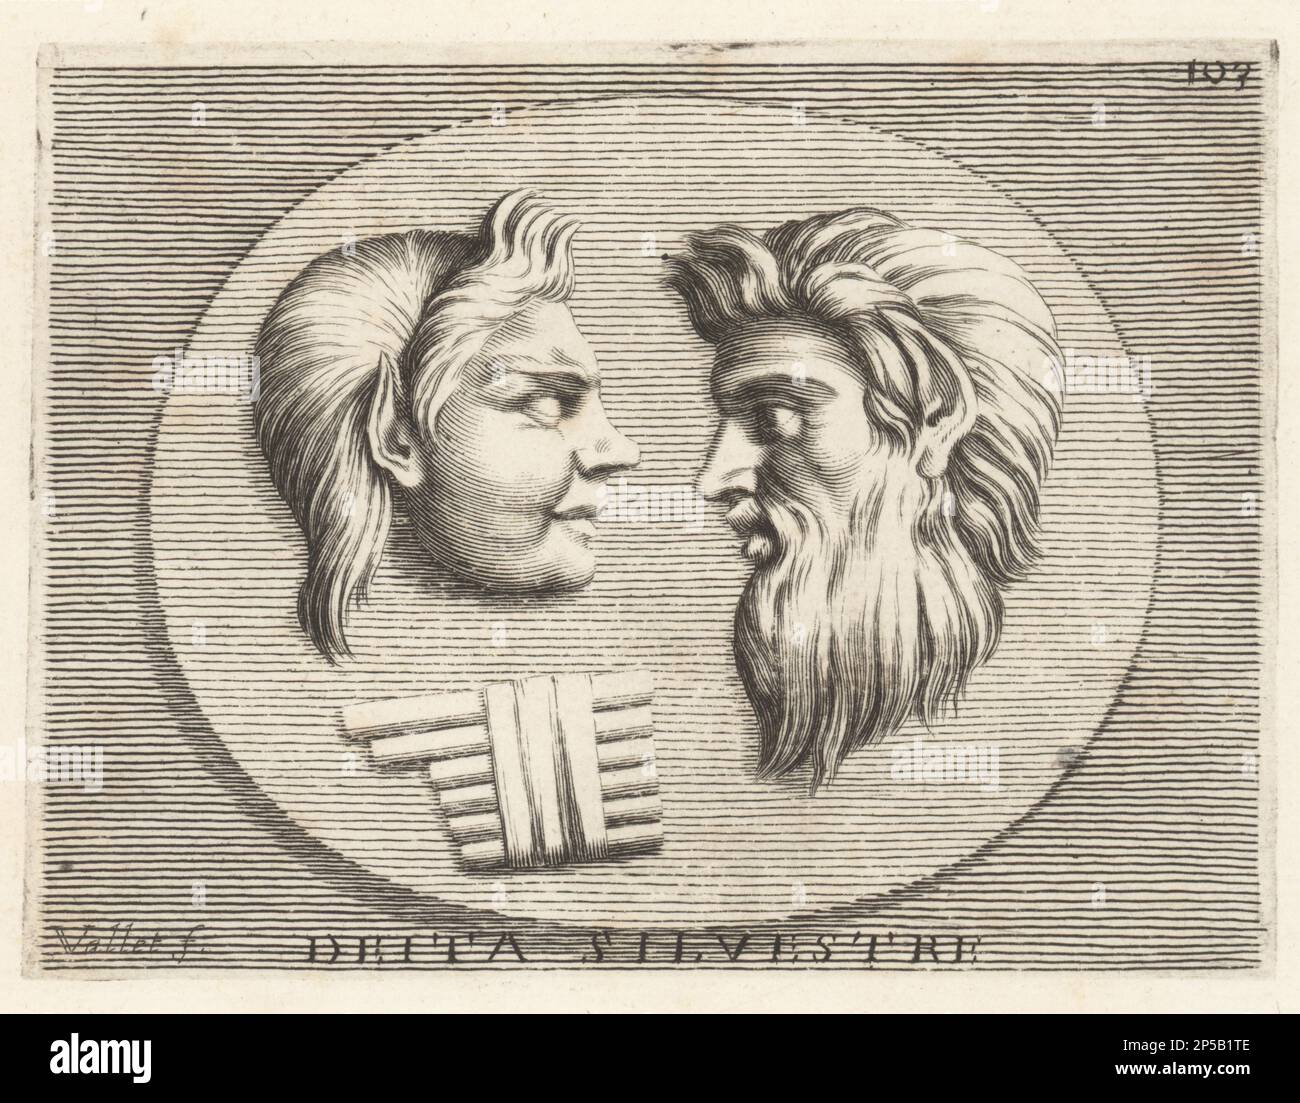 Heads of Greek woodland gods with syrinx or pan flute. Heads of a Faun, half human and half goat, and a Satyr or Silenus, bearded man with horse ears. Deita Silvestre. Copperplate engraving by Guillaume Vallet after Giovanni Angelo Canini from Iconografia, cioe disegni d'imagini de famosissimi monarchi, regi, filososi, poeti ed oratori dell' Antichita, Drawings of images of famous monarchs, kings, philosophers, poets and orators of Antiquity, Ignatio de’Lazari, Rome, 1699. Stock Photo